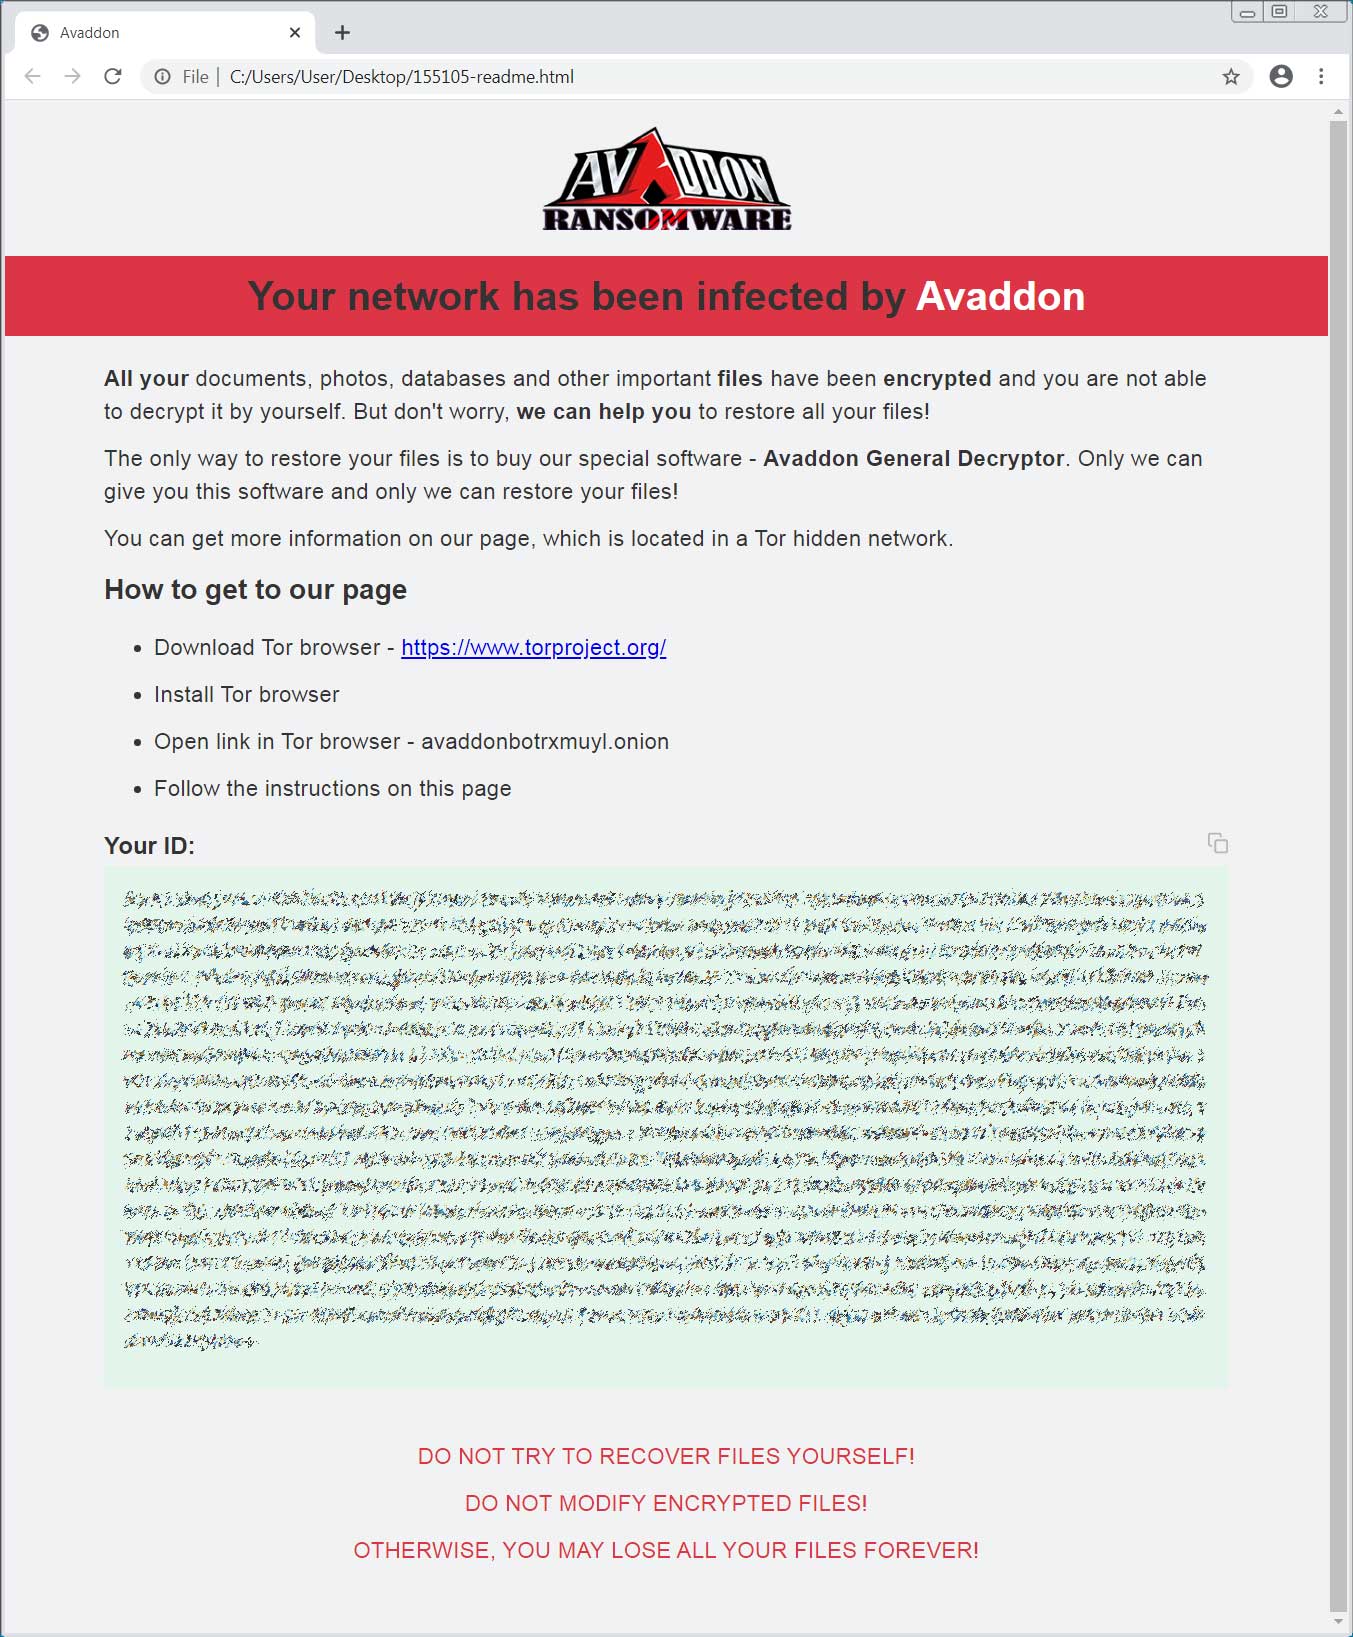 Avaddon Ransom Note (Click to enlarge)